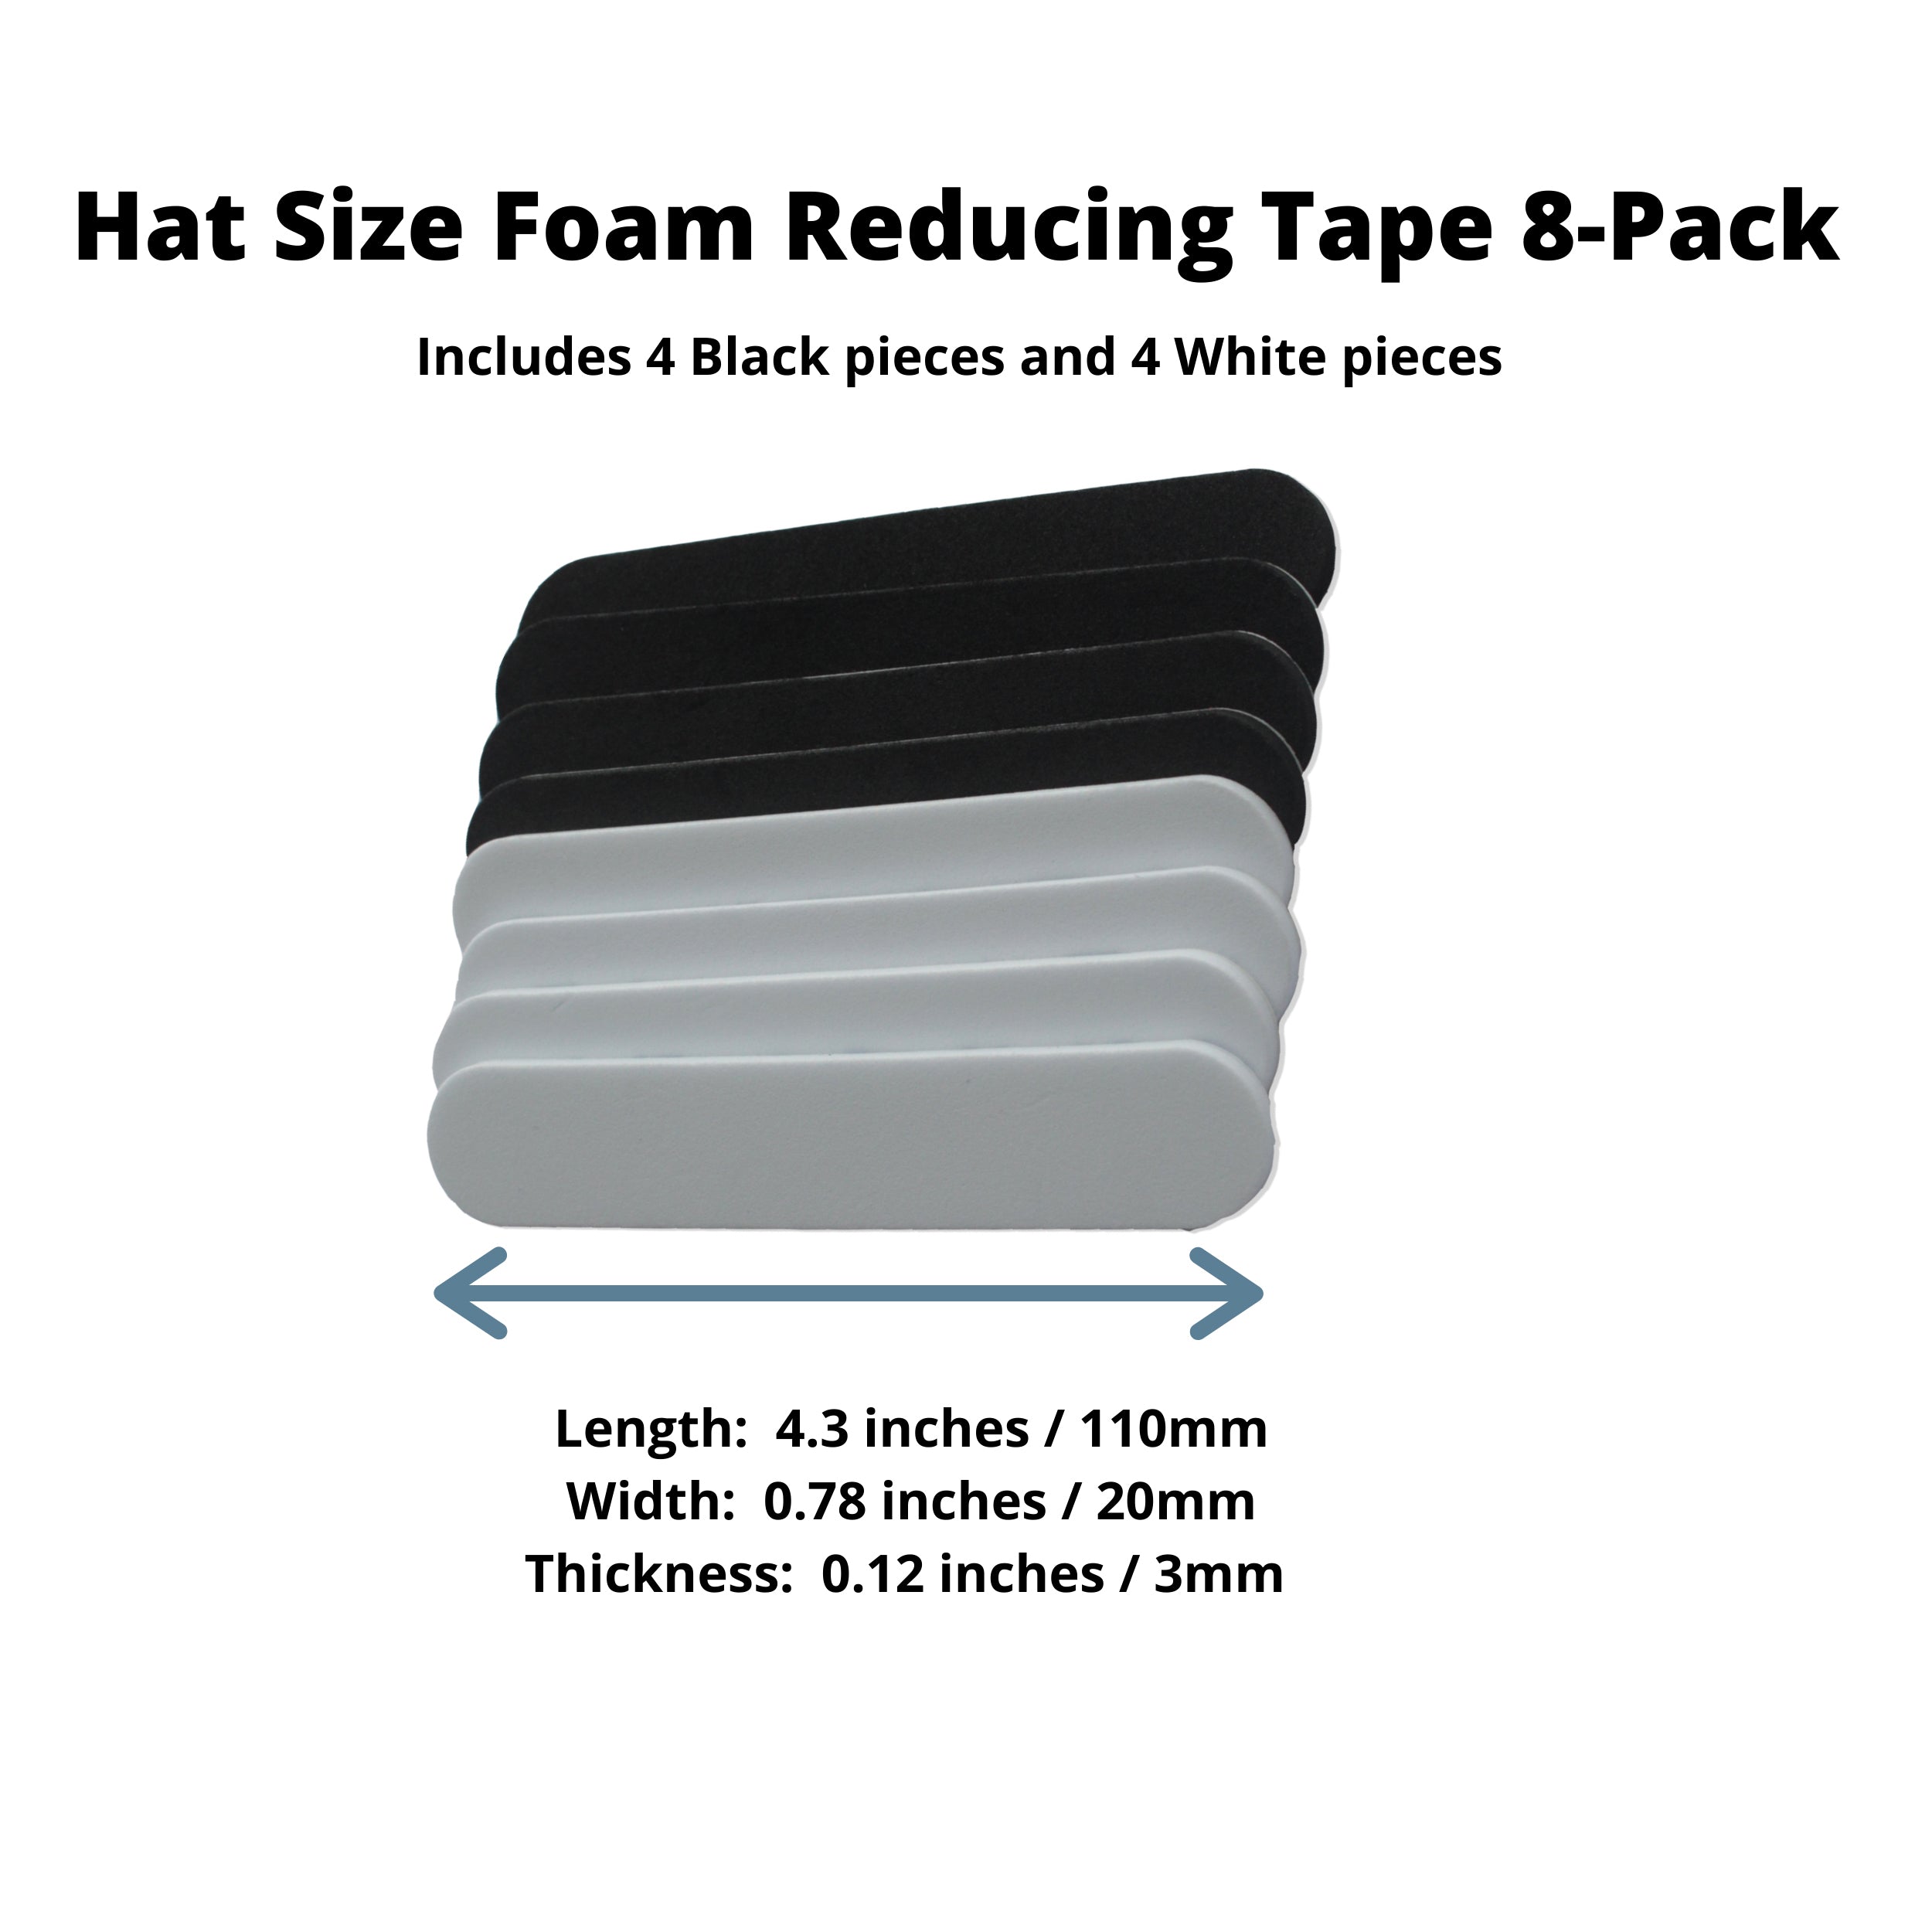 Long Sticky Sizing Insert  American hat makers, Black and tan, Sticky